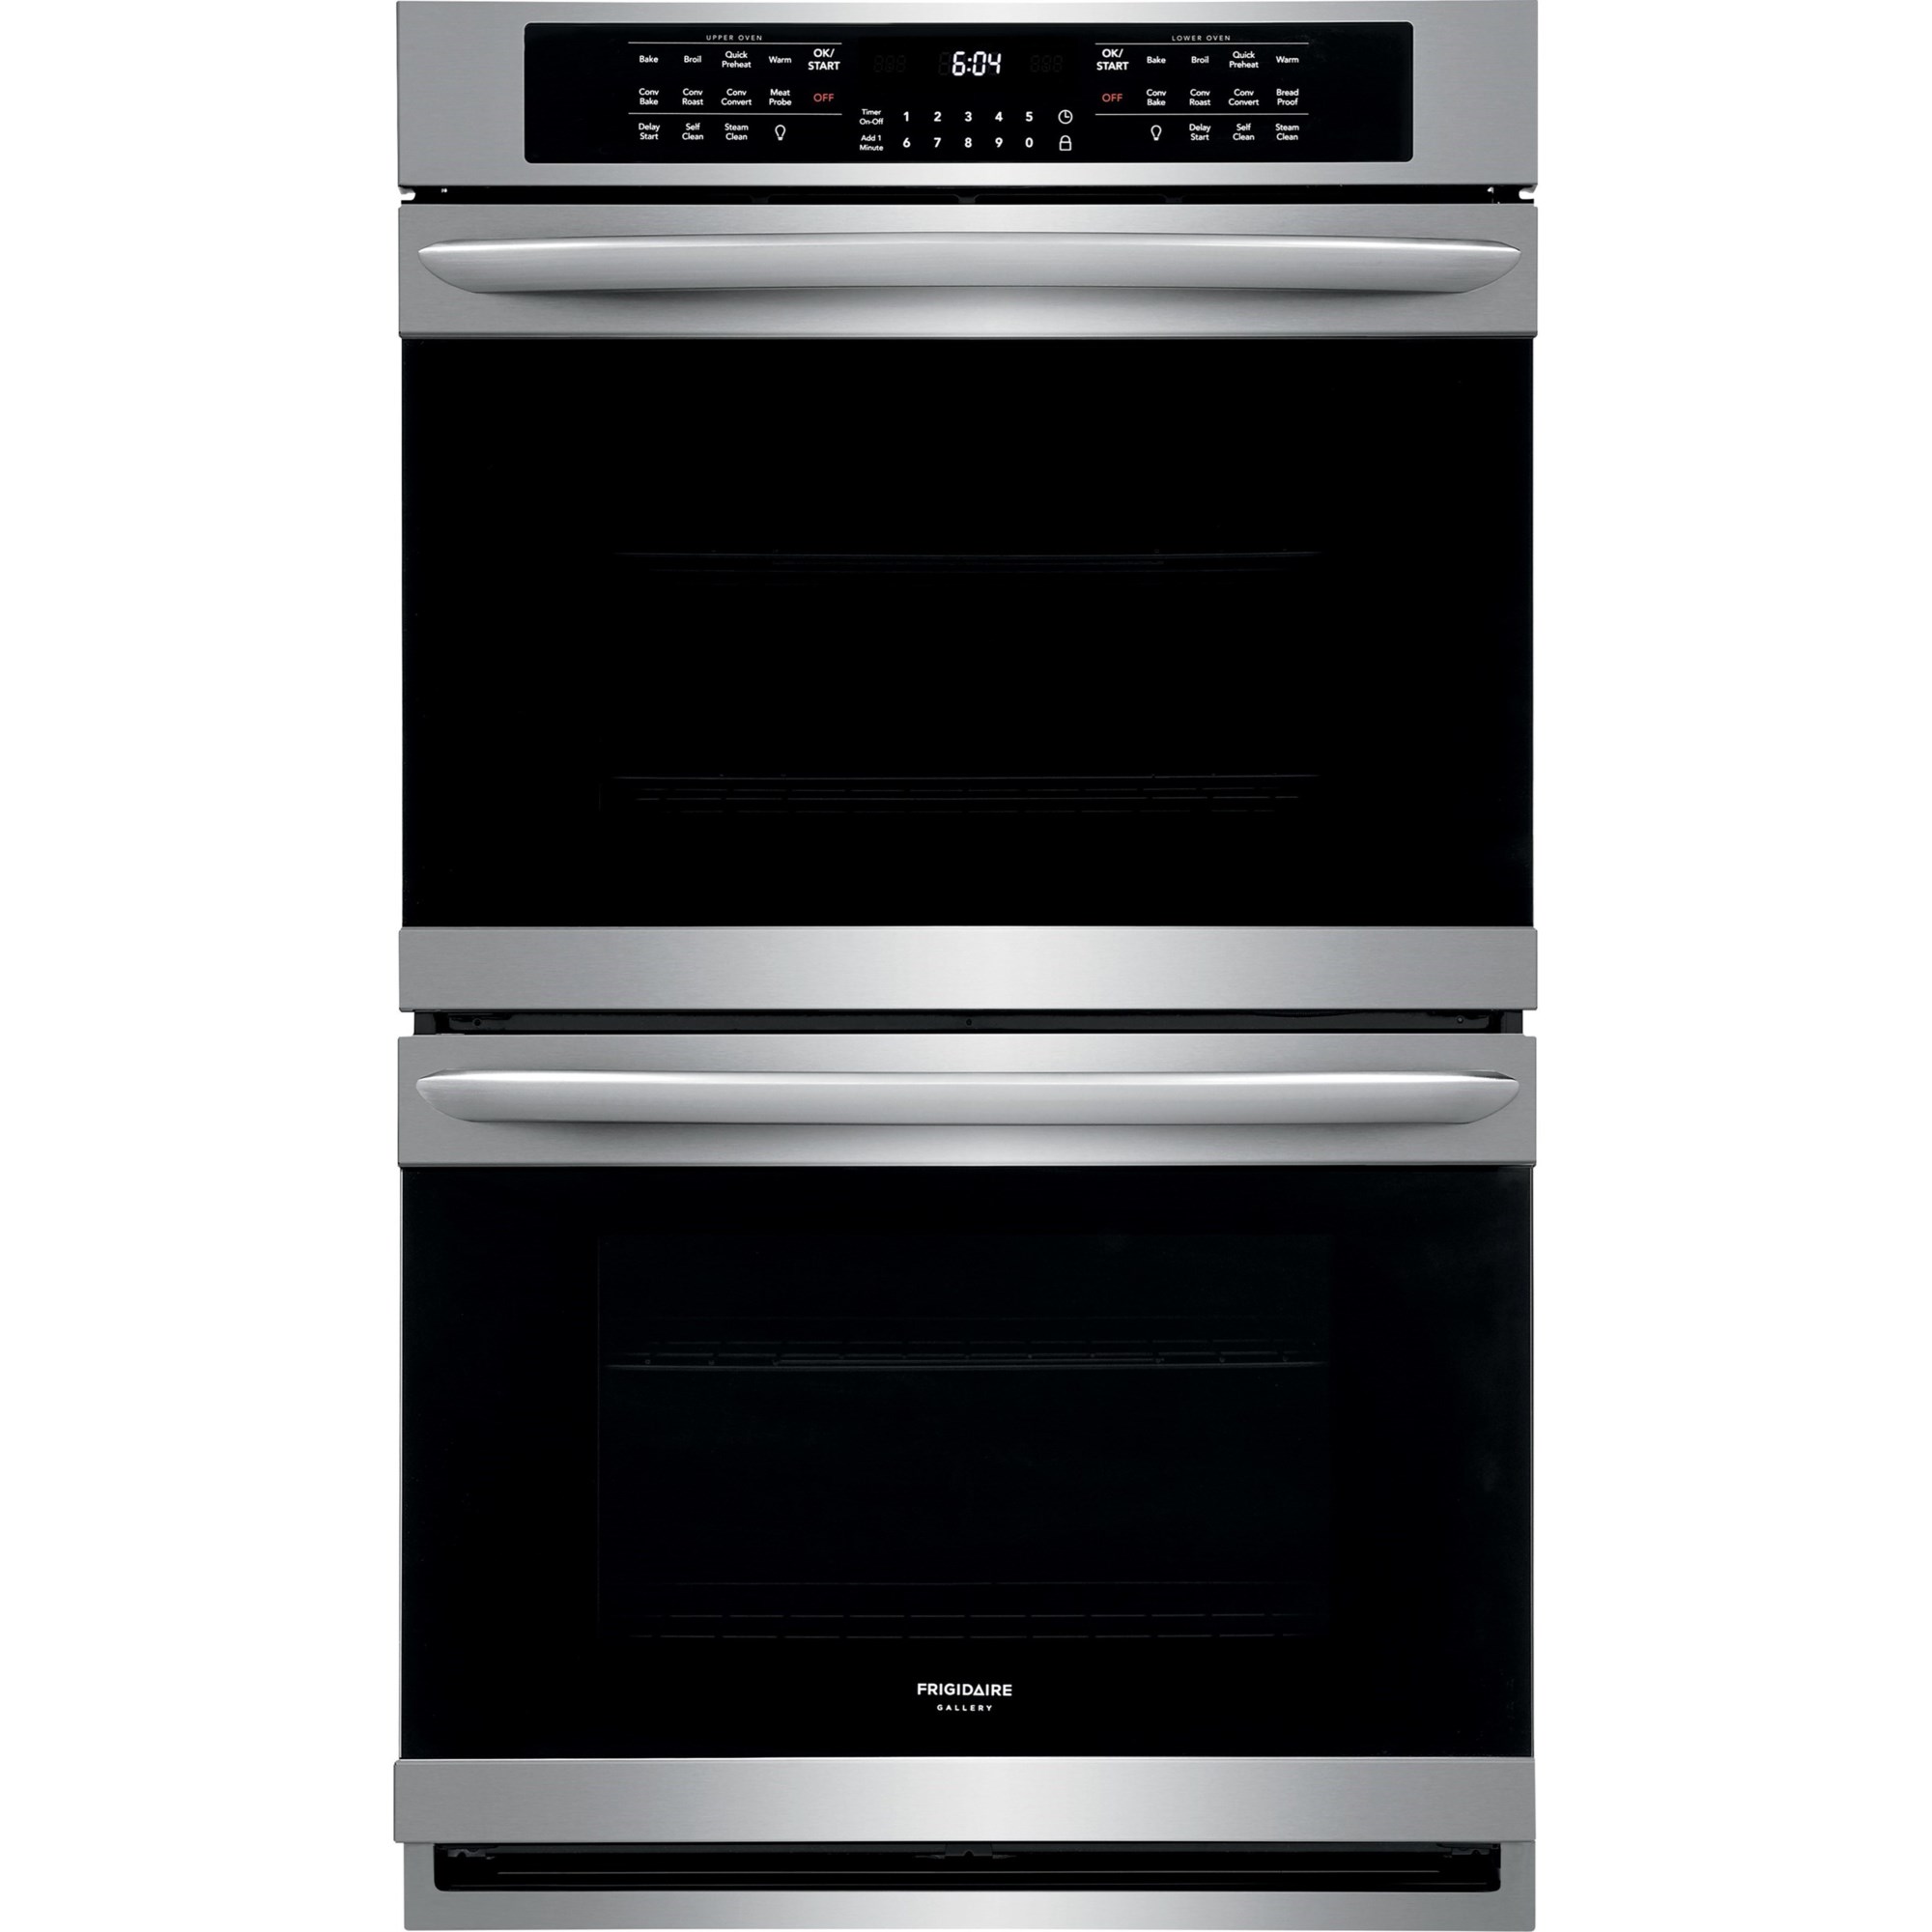 Frigidaire Frigidaire 27 inch Double Electric Wall Oven with Total Convection - Stainless Steel